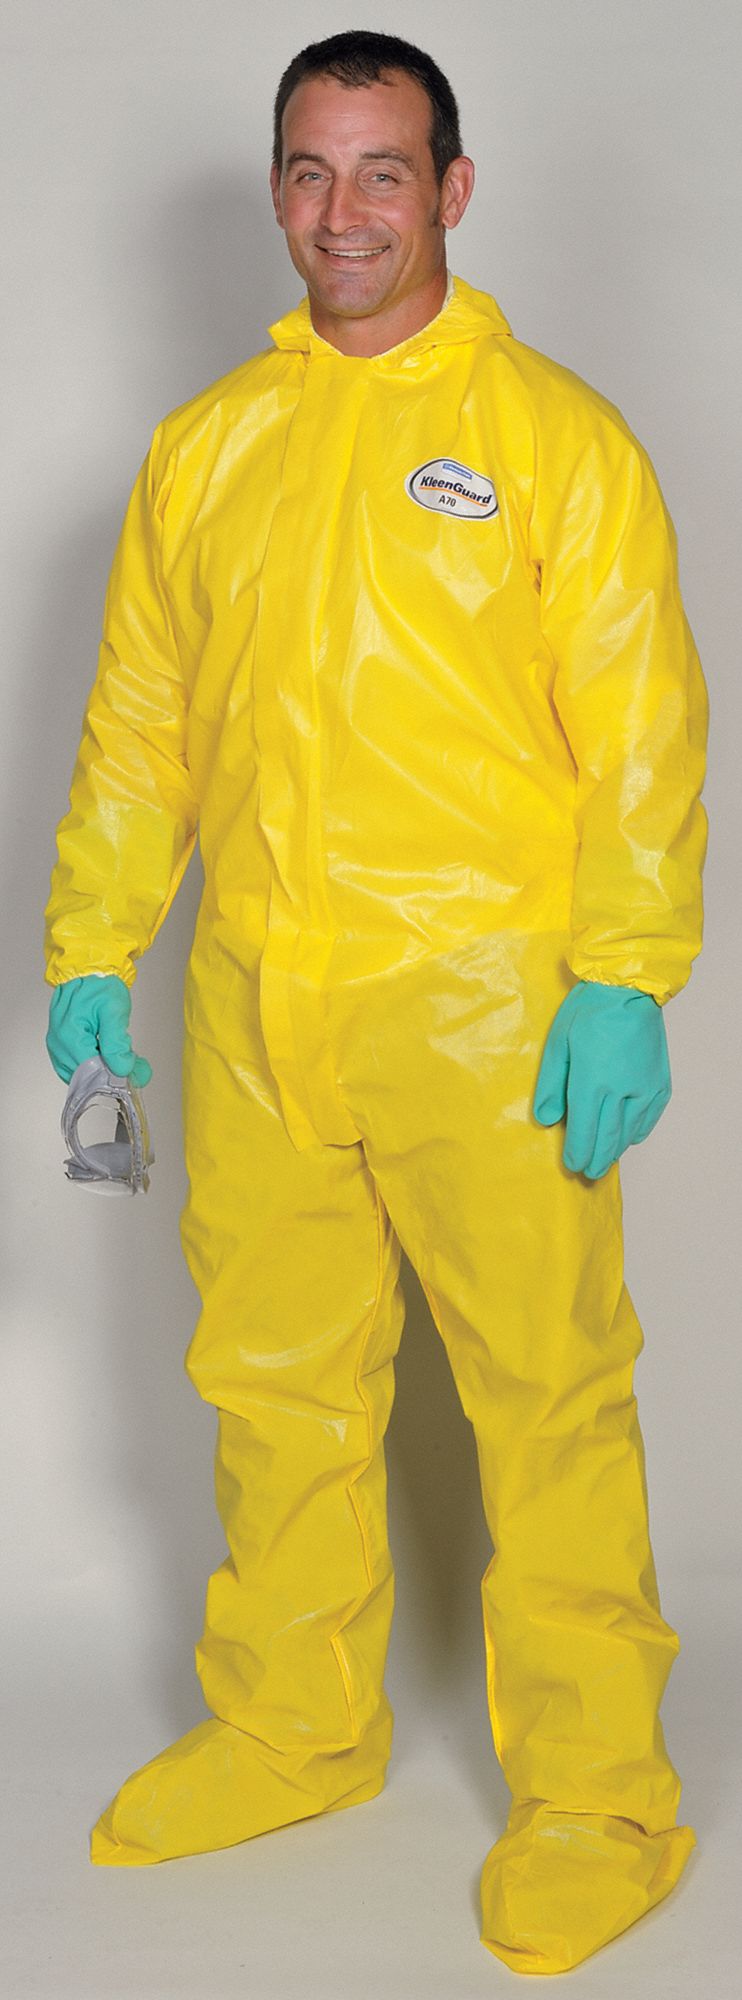 Raytex Yellow Disposable Chemical Protection Coveralls with Hood Elastic Cuffs Serged Seam Front Double Zipper Closure Double Kneestrap Suits for Hazardous Processing Cleaning Workwear 2XL 